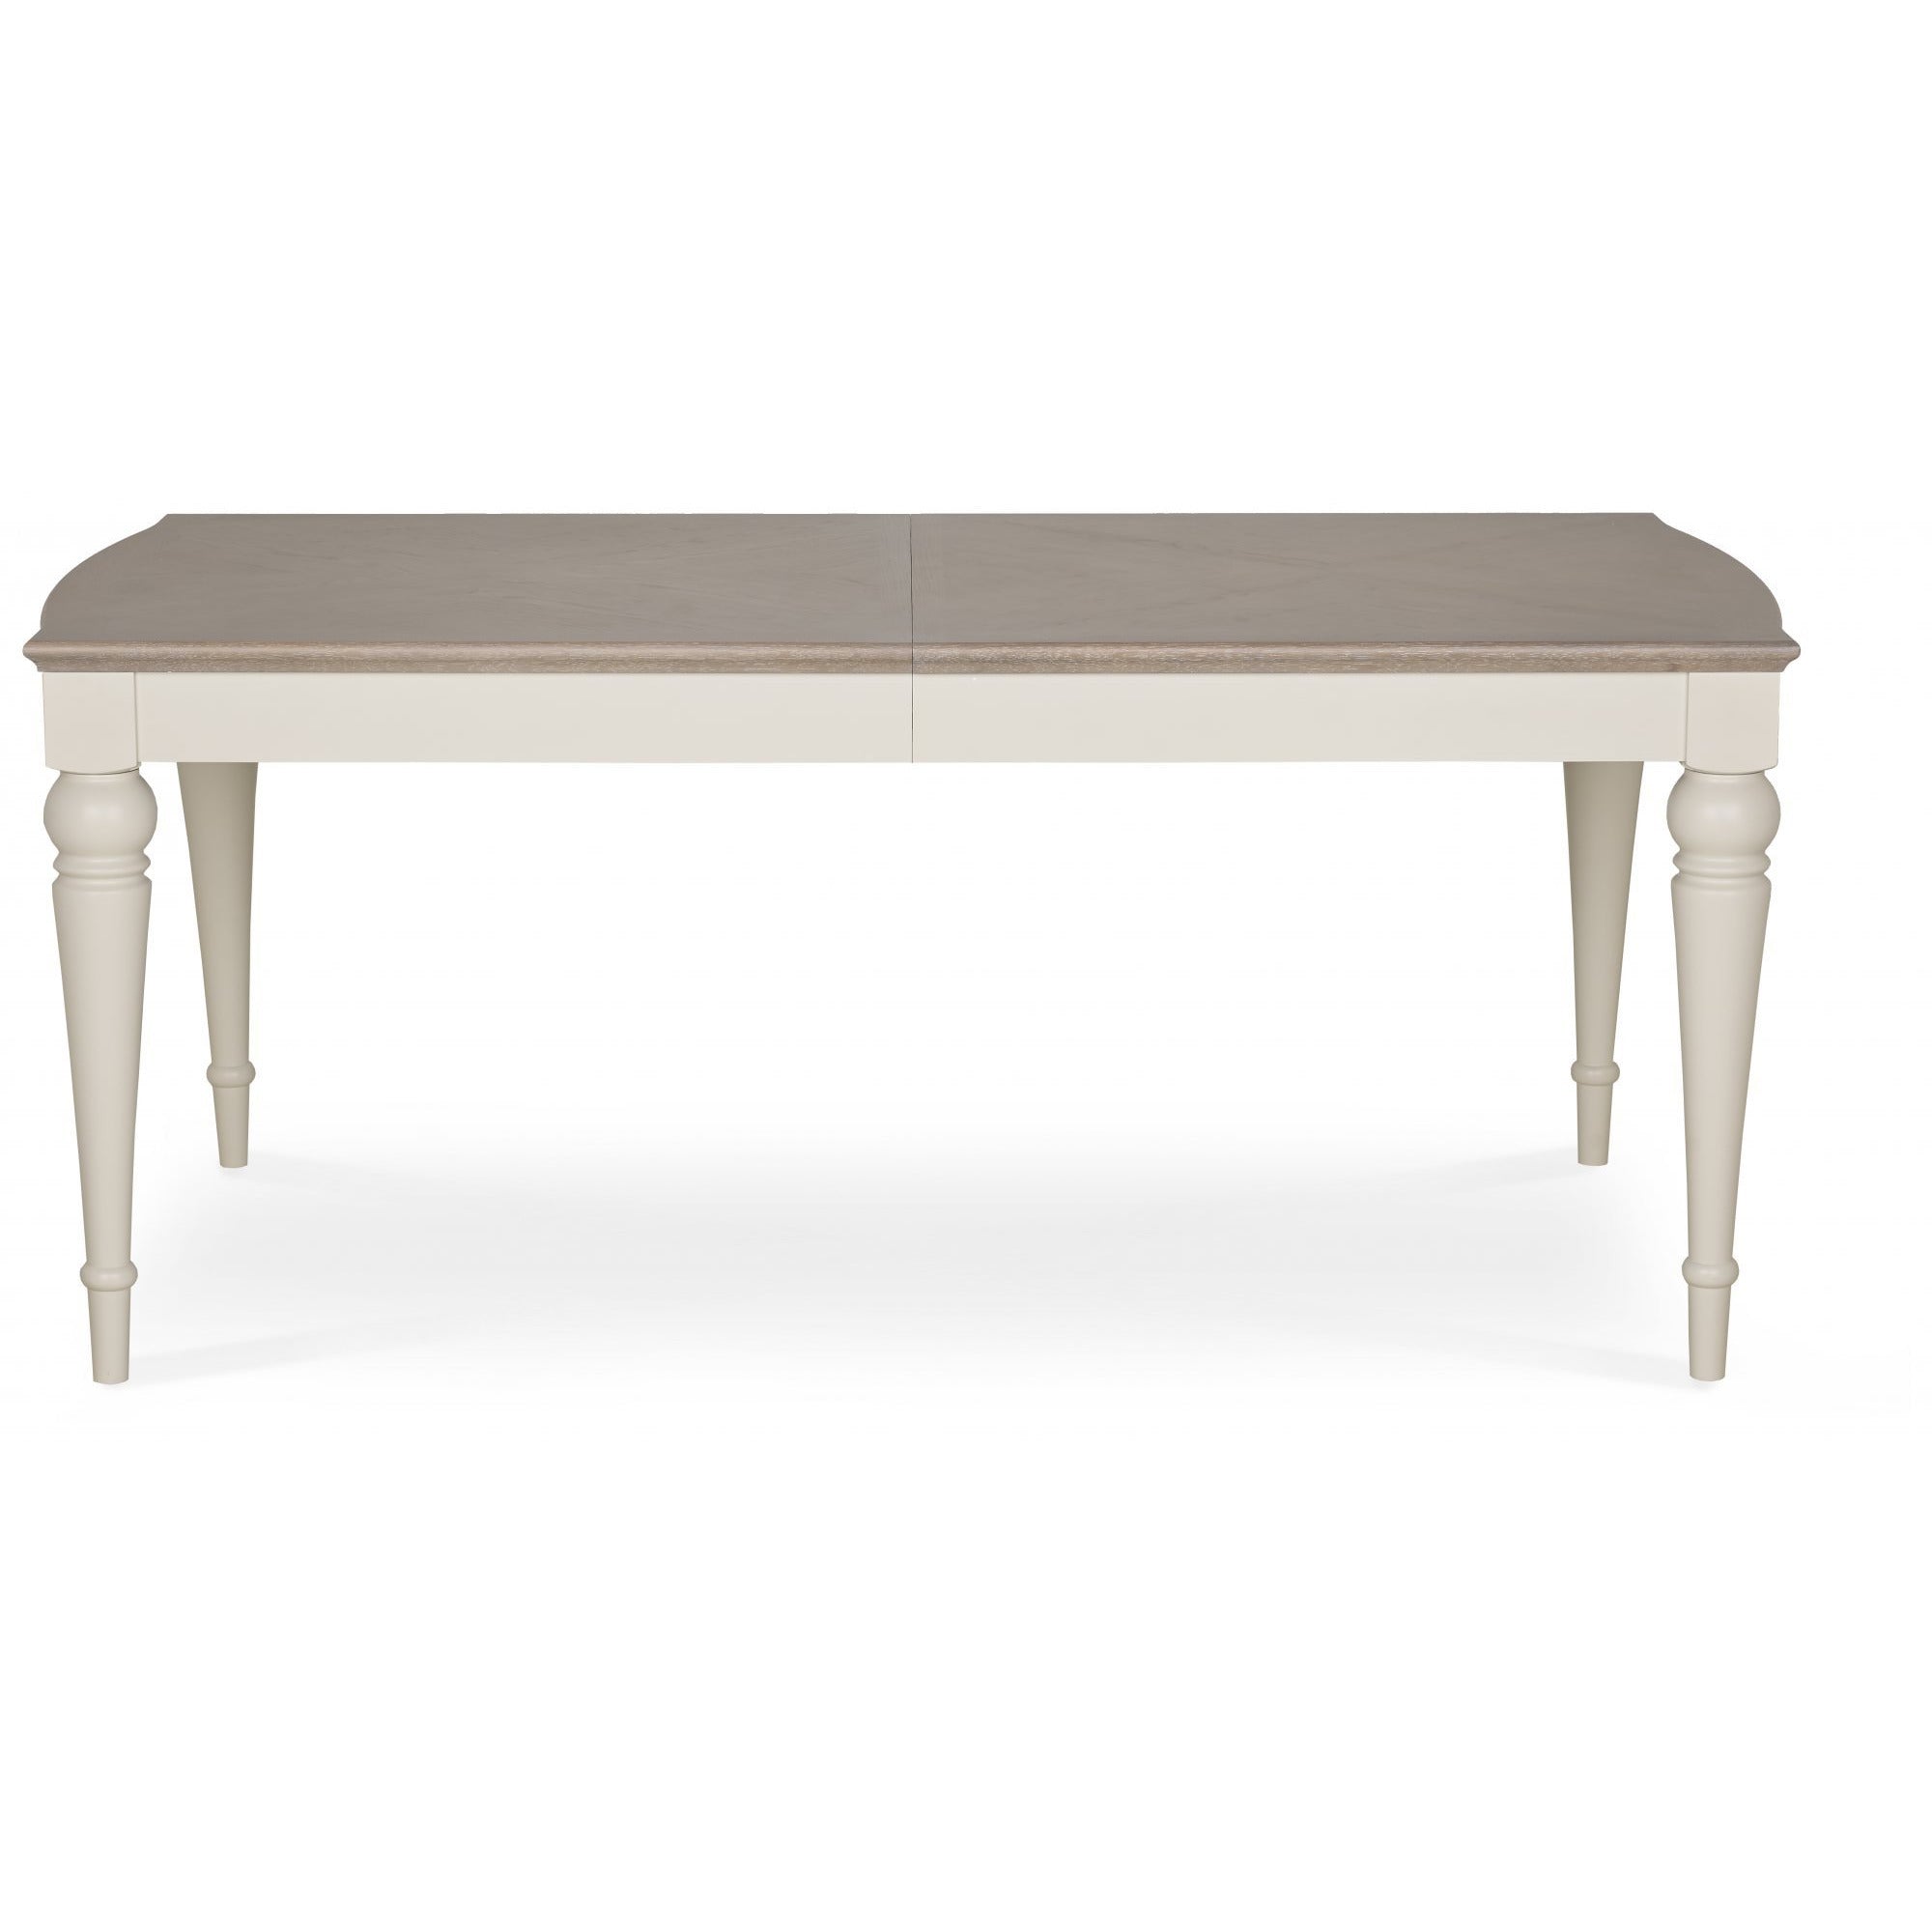 Montreux Large Extending Dining Table - Soft Grey